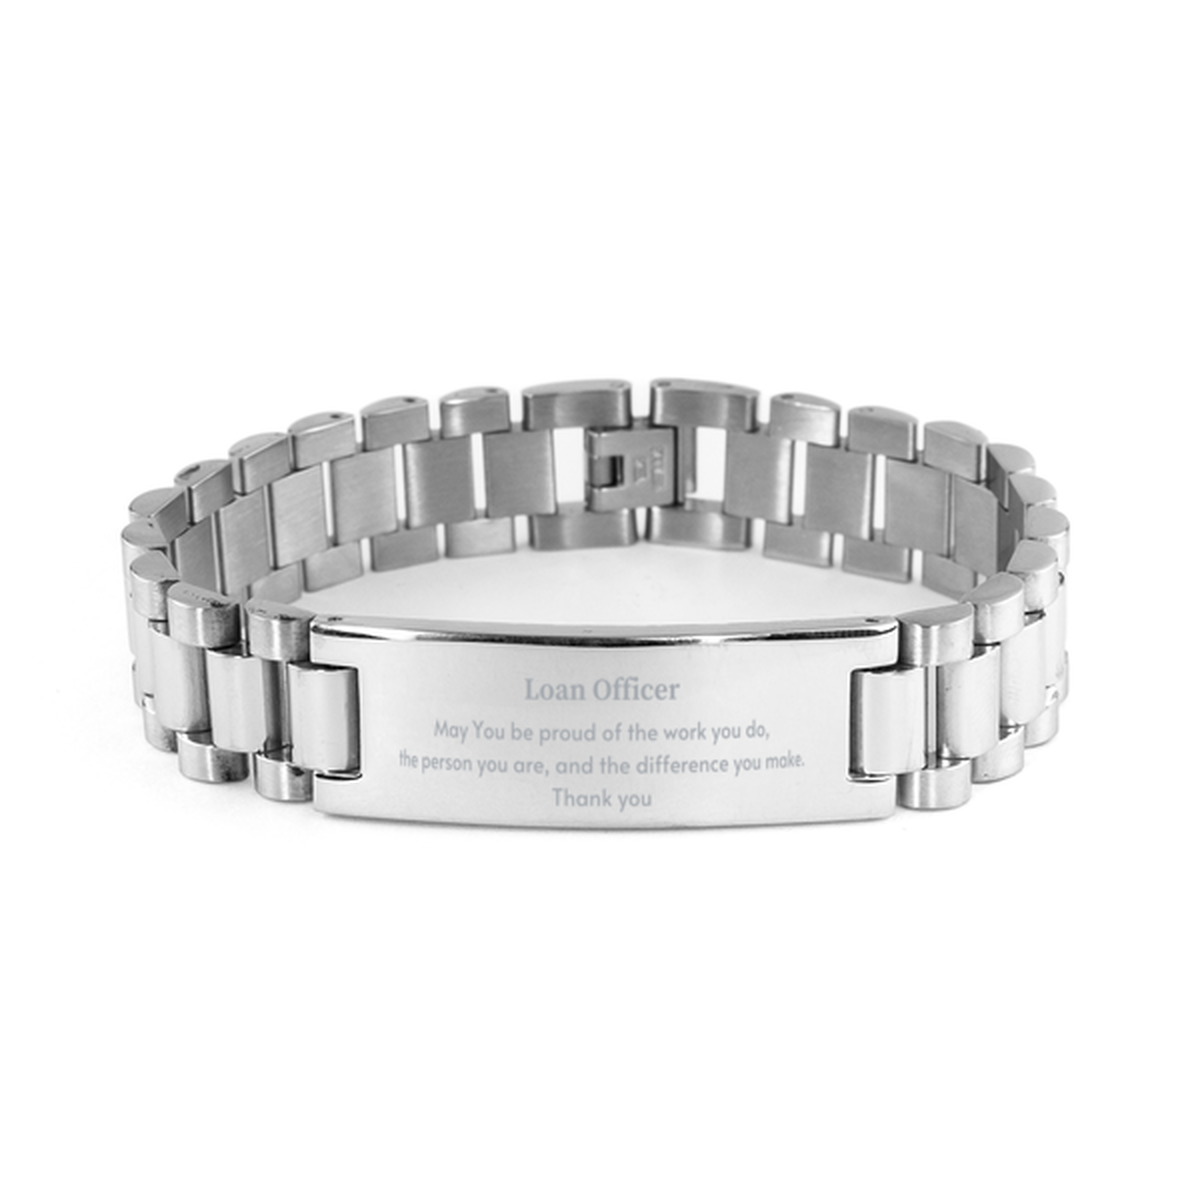 Heartwarming Ladder Stainless Steel Bracelet Retirement Coworkers Gifts for Loan Officer, Loan Officer May You be proud of the work you do, the person you are Gifts for Boss Men Women Friends